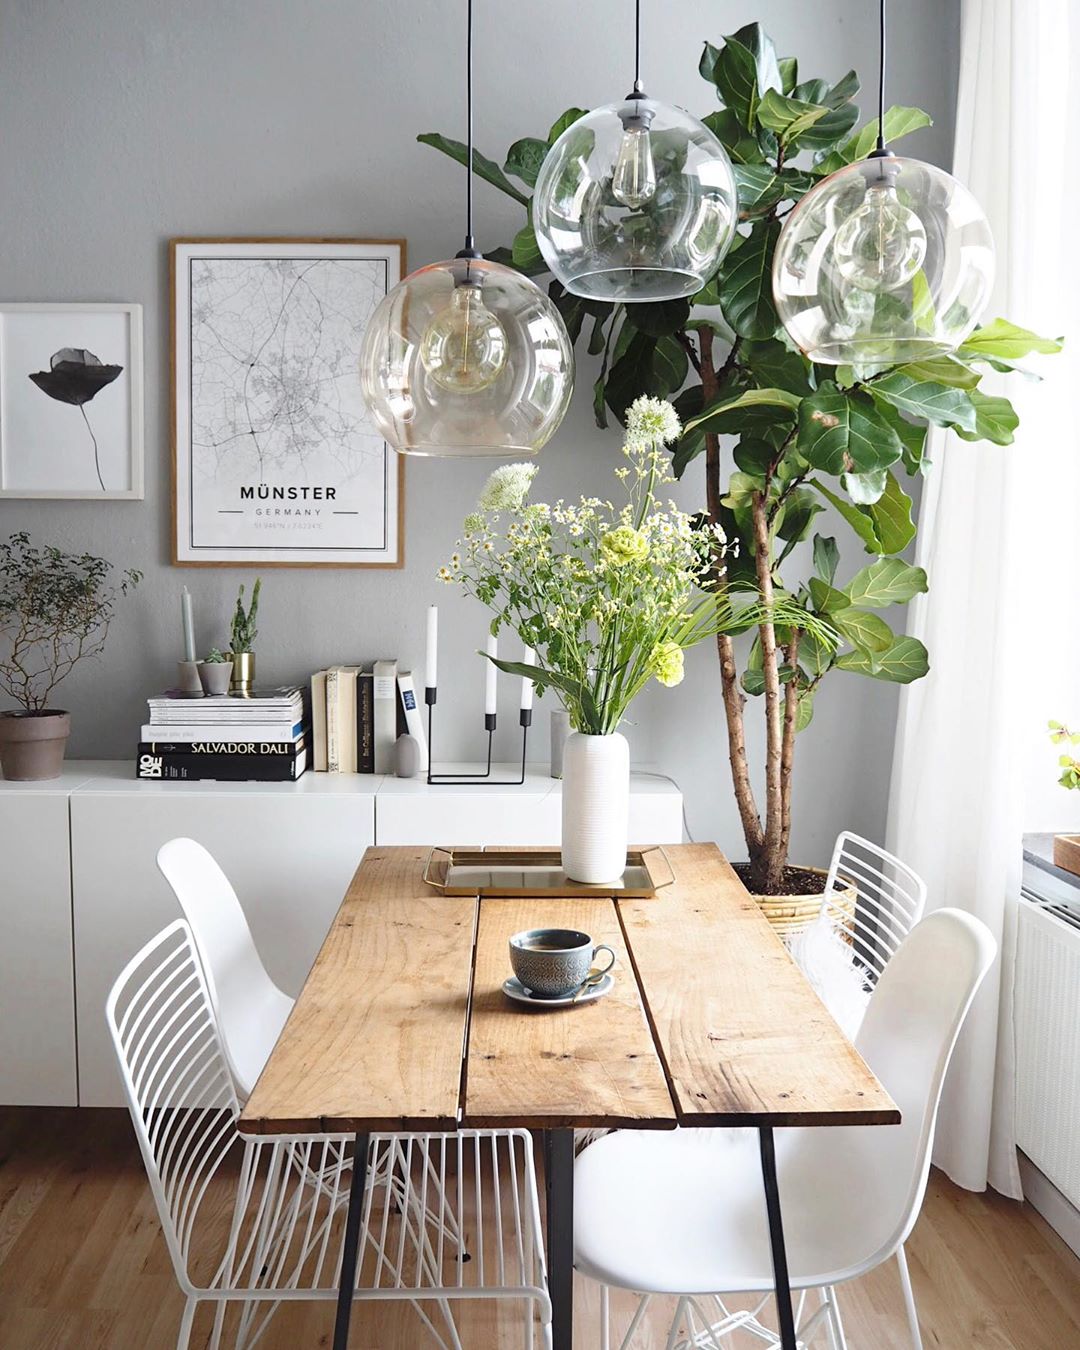 White dining room with wood table and tree in the corner designed by Scandinavian style. Photo by Instagram user @oursweetliving